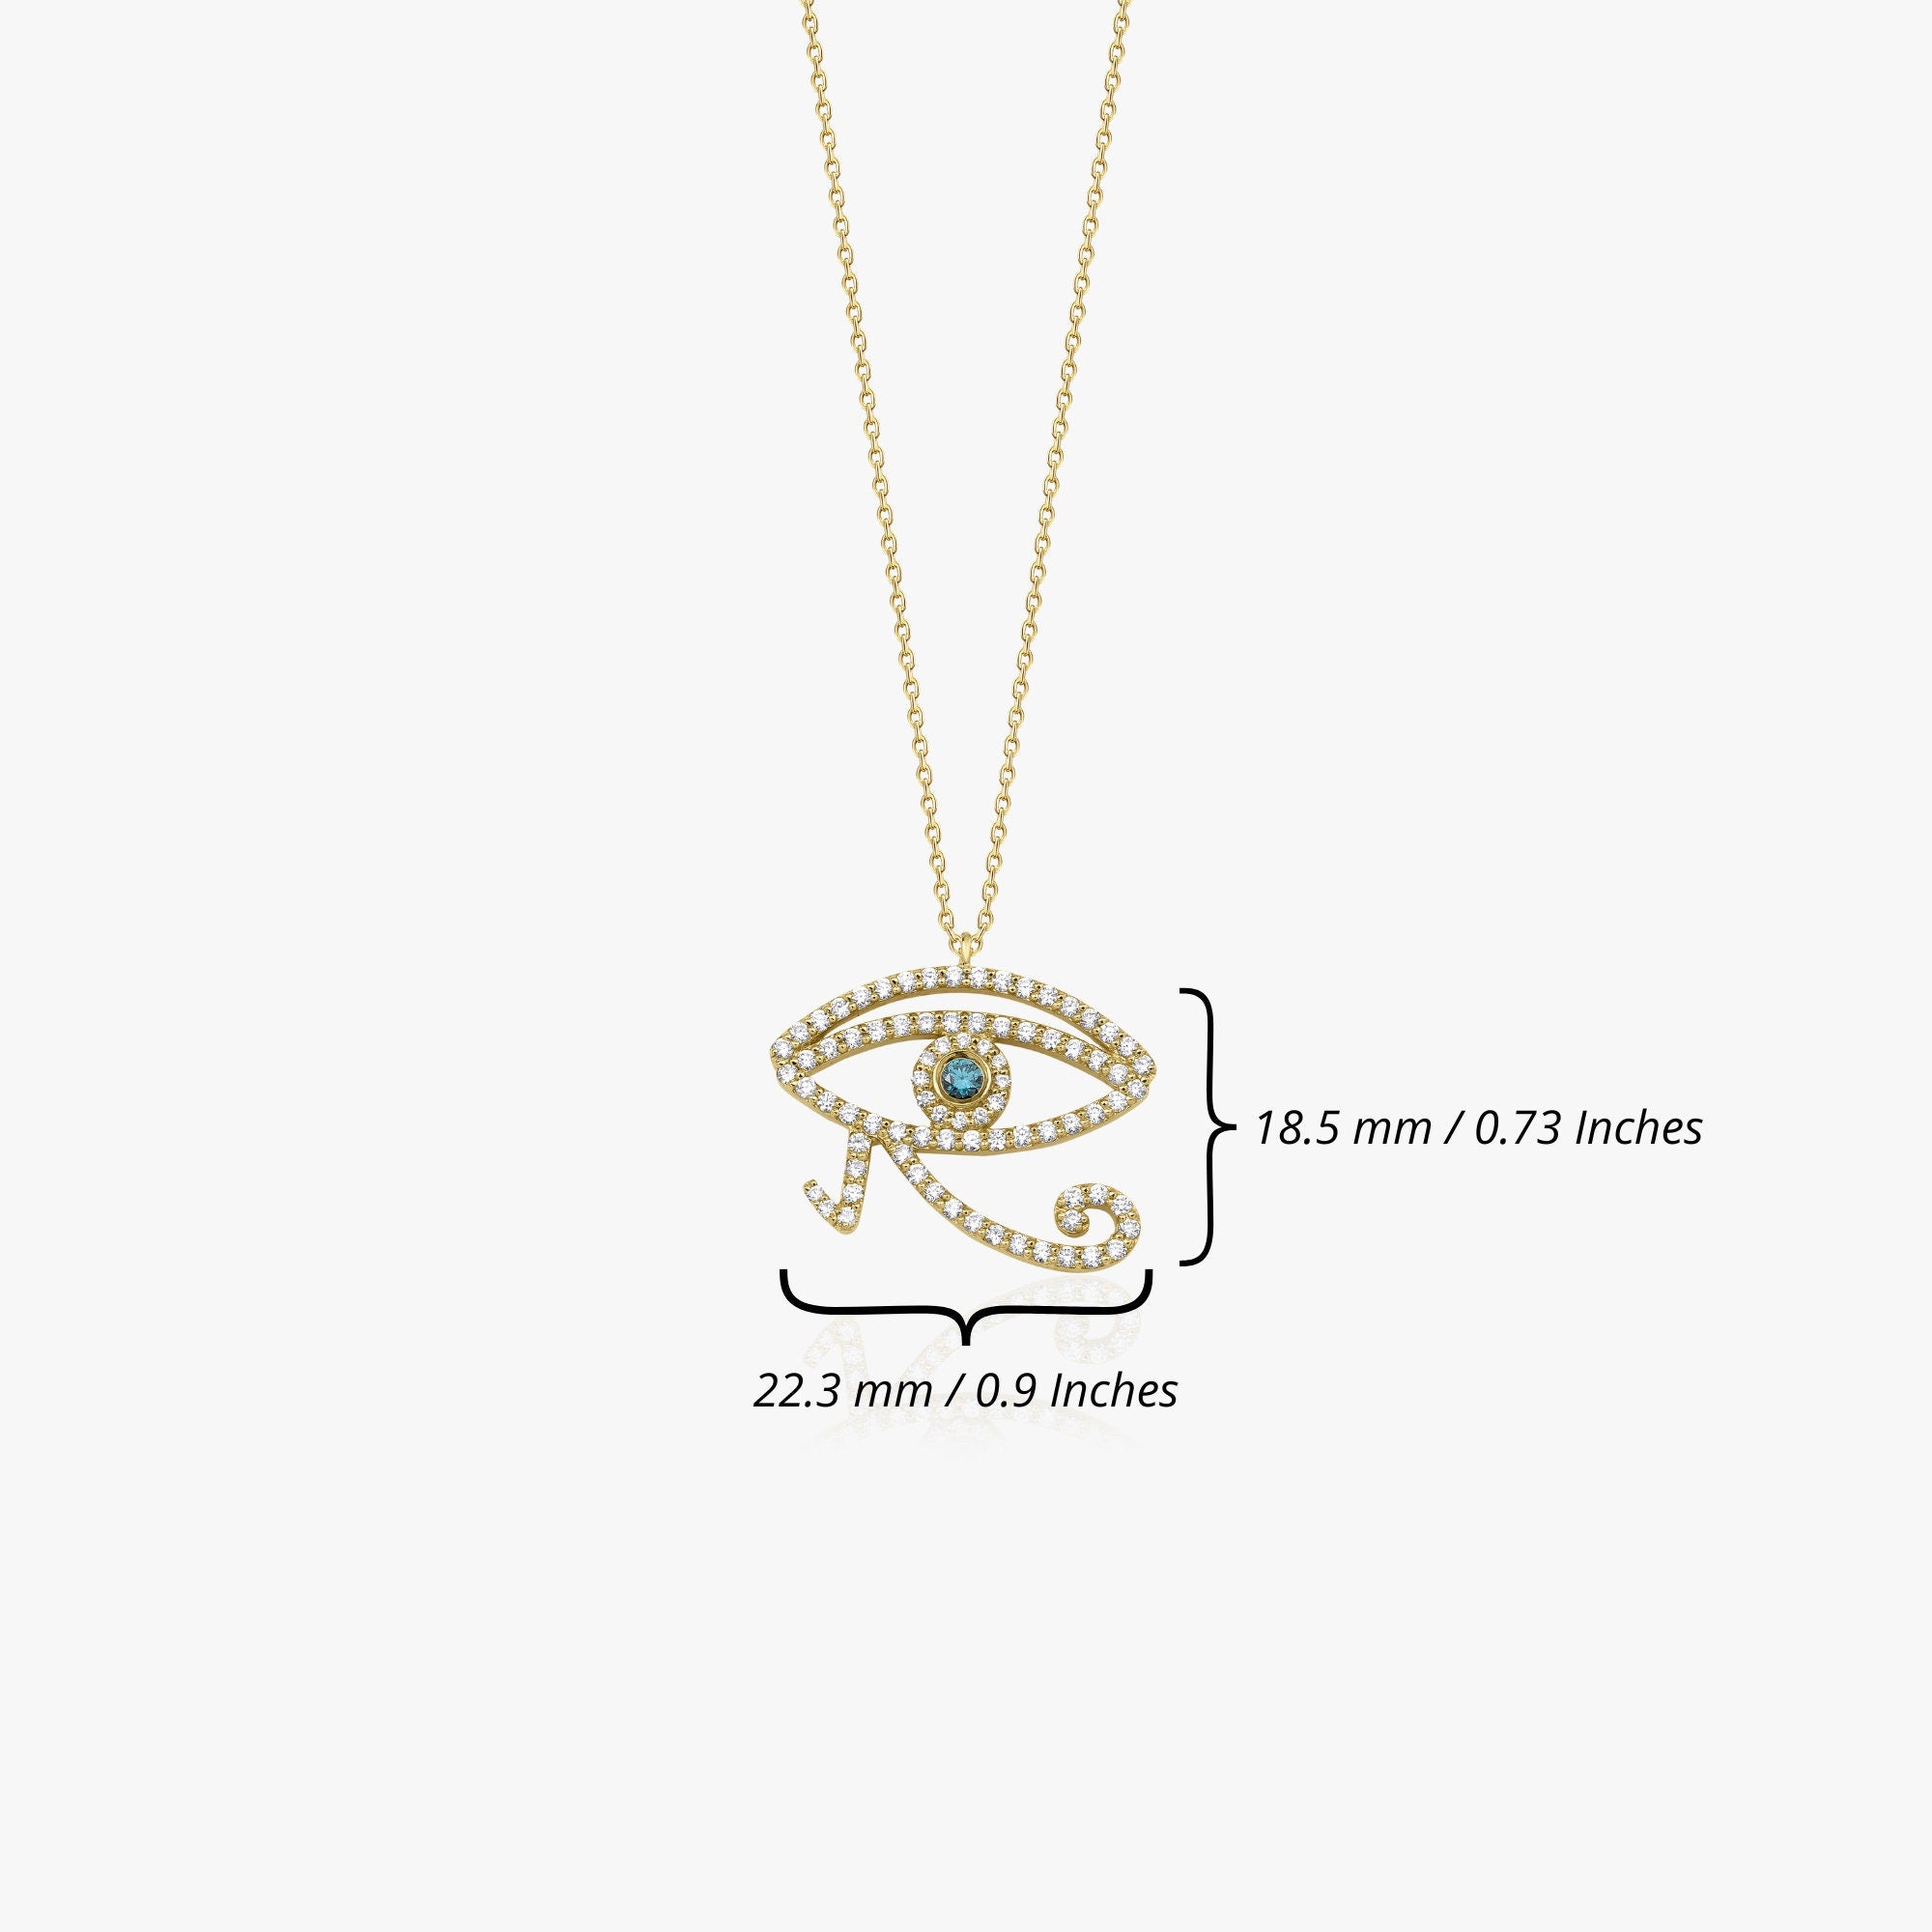 Diamond Eye Of Horus Necklace Available in 14K and 18K Gold